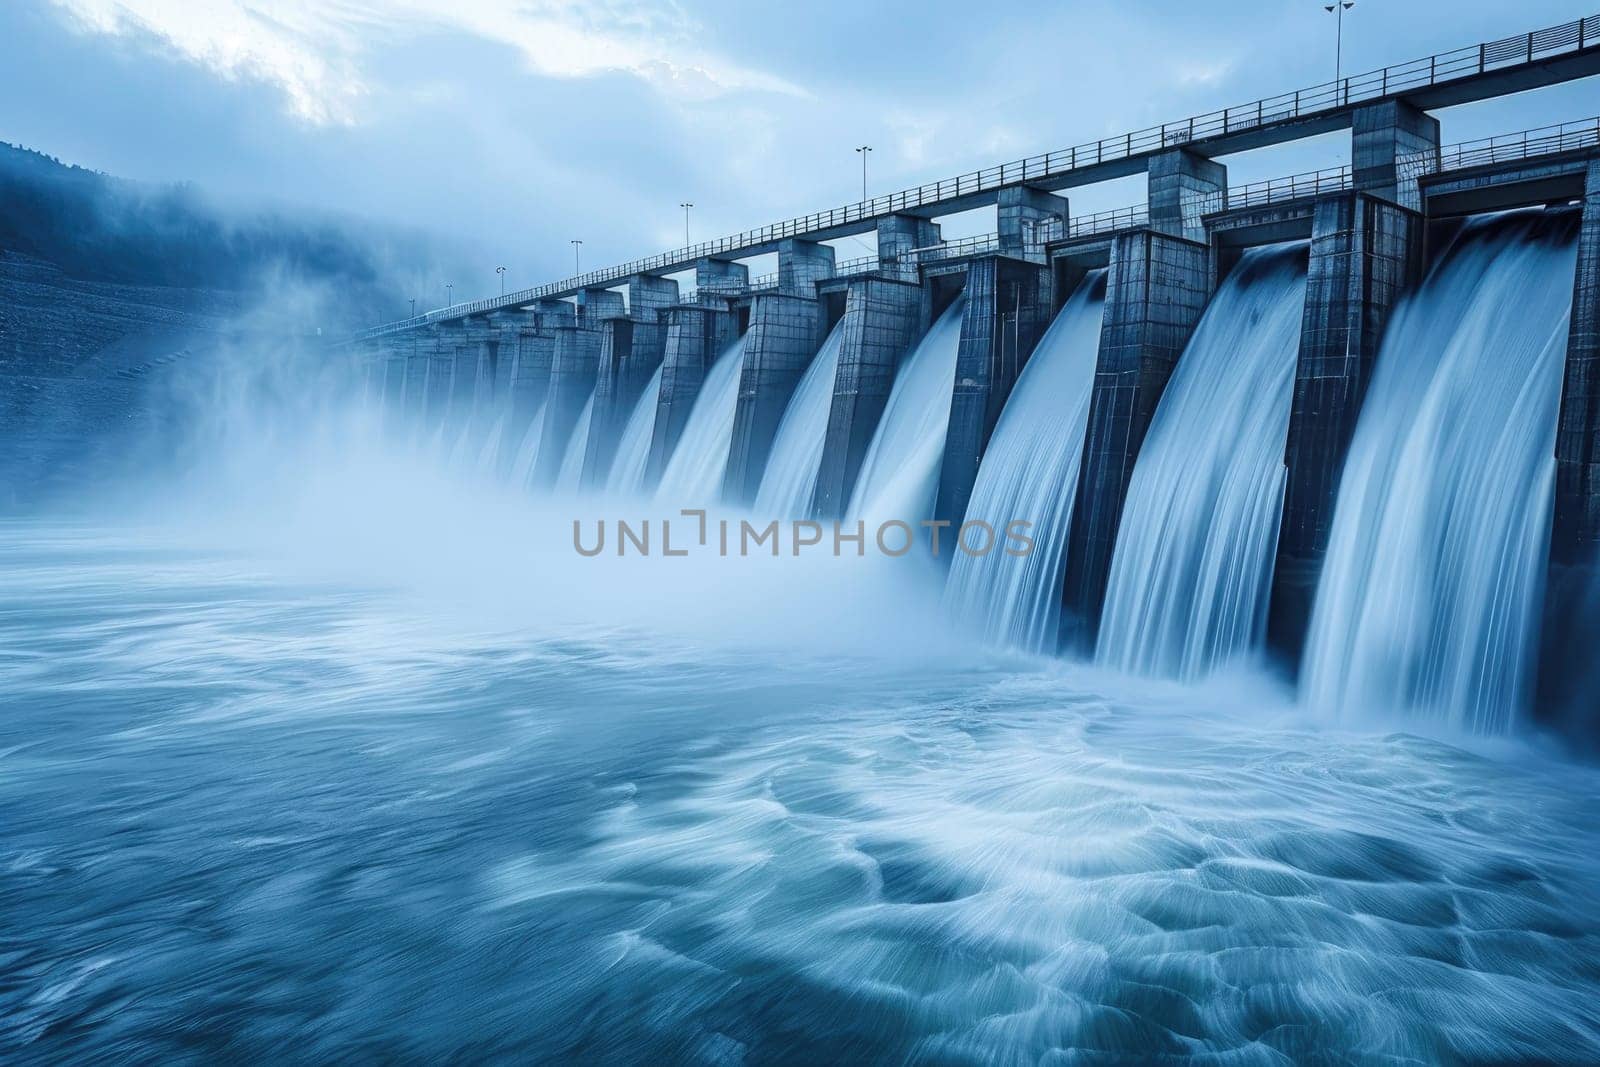 A majestic hydroelectric dam with cascading water, generating clean electricity through renewable resources. by Chawagen